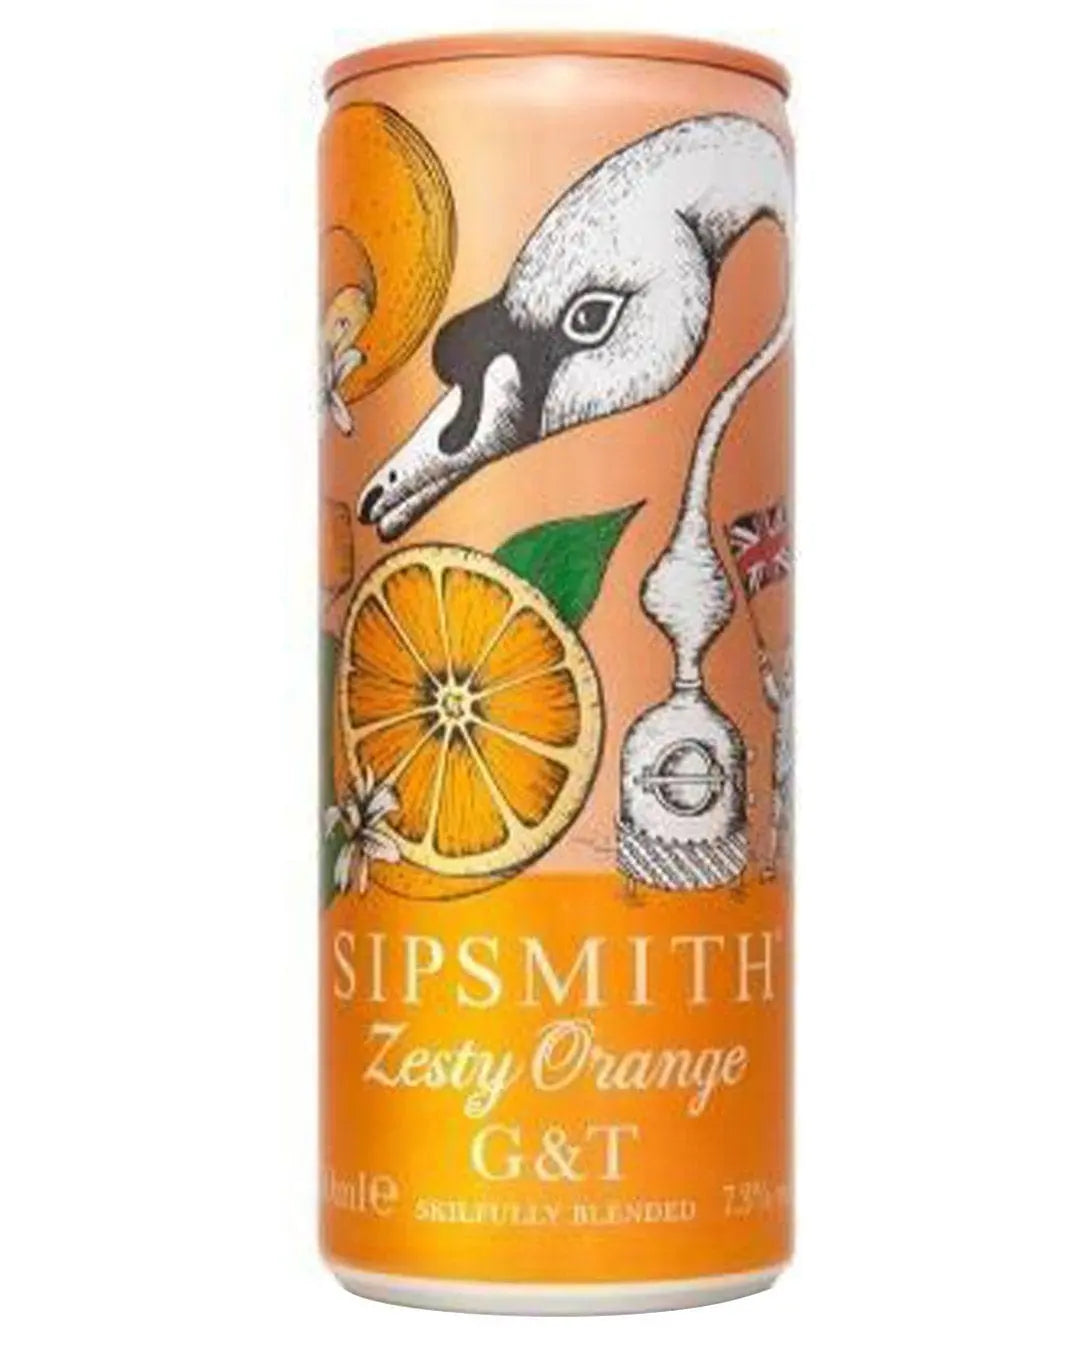 Sipsmith Zesty Orange Gin & Tonic Premixed Cocktail Can, 250 ml Ready Made Cocktails